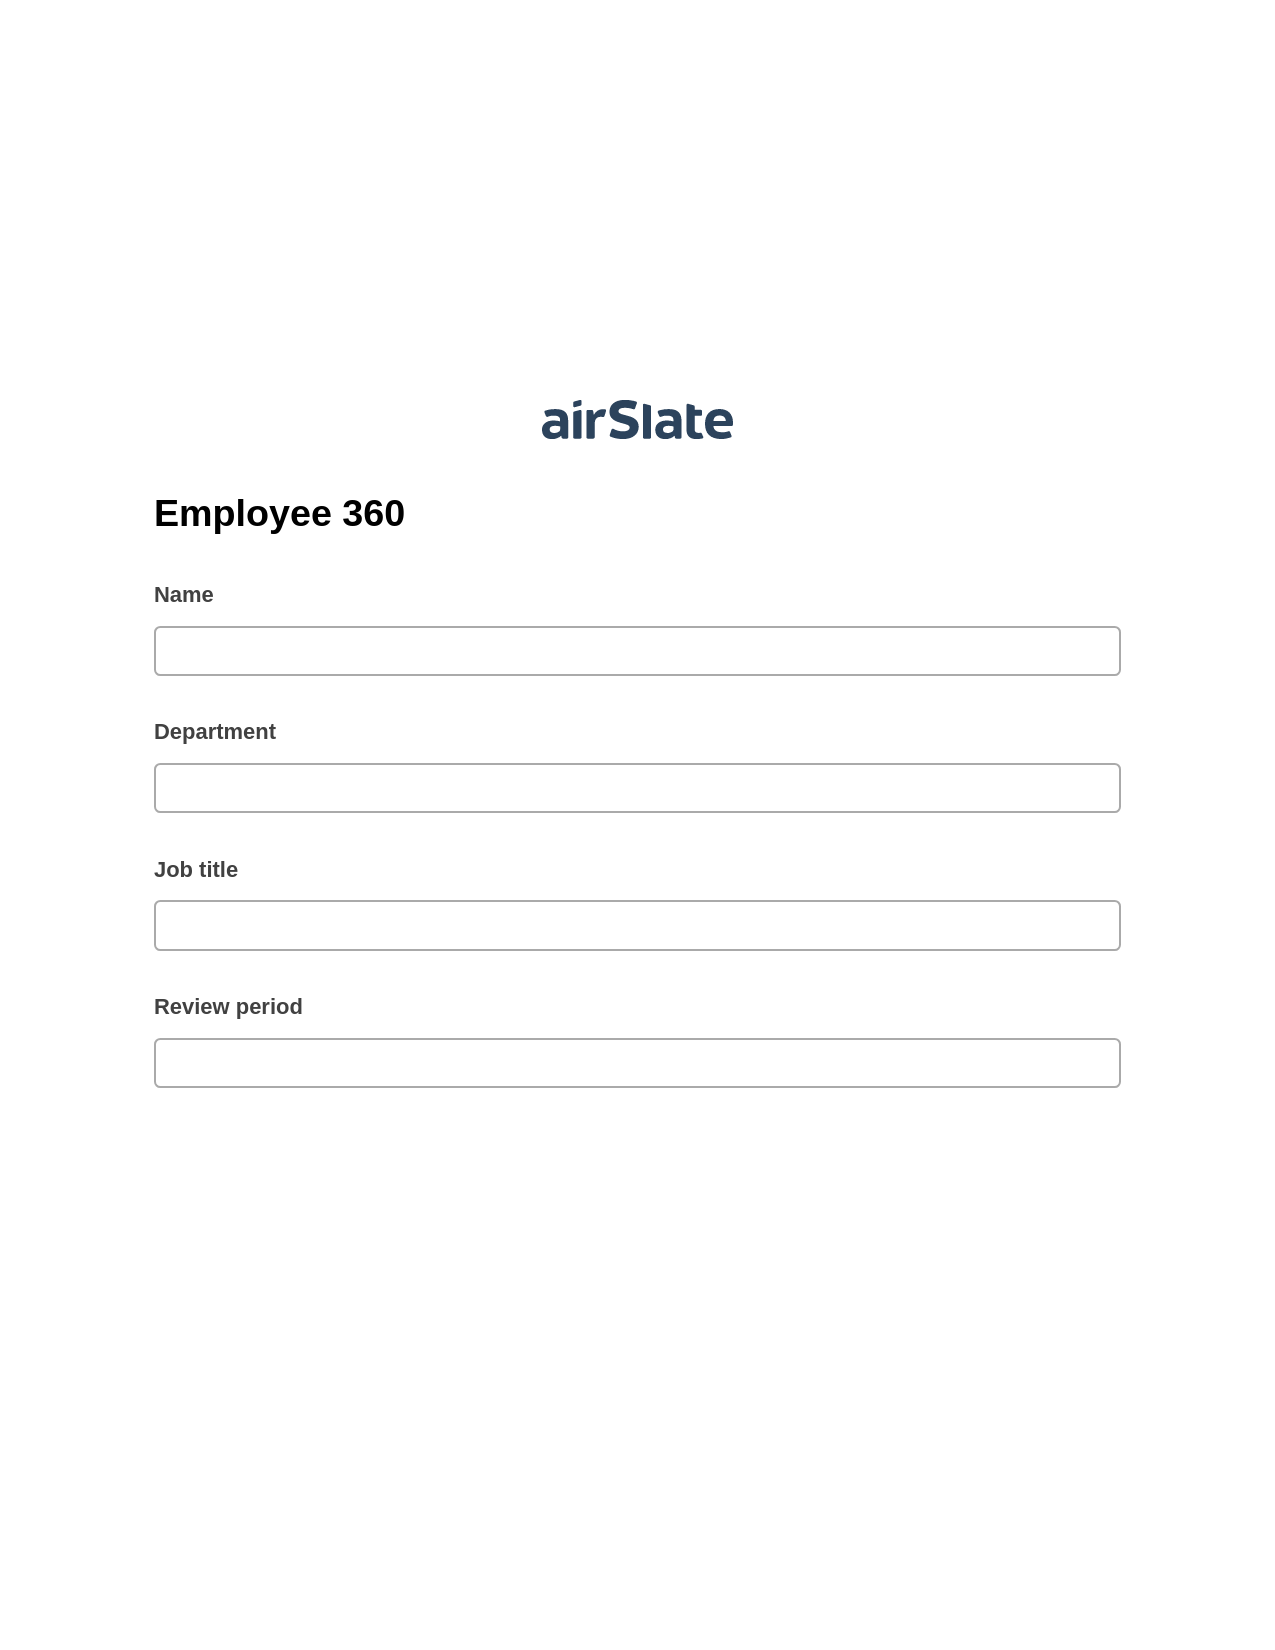 Employee 360 Pre-fill from MS Dynamics 365 Records, Update MS Dynamics 365 Record Bot, Export to WebMerge Bot